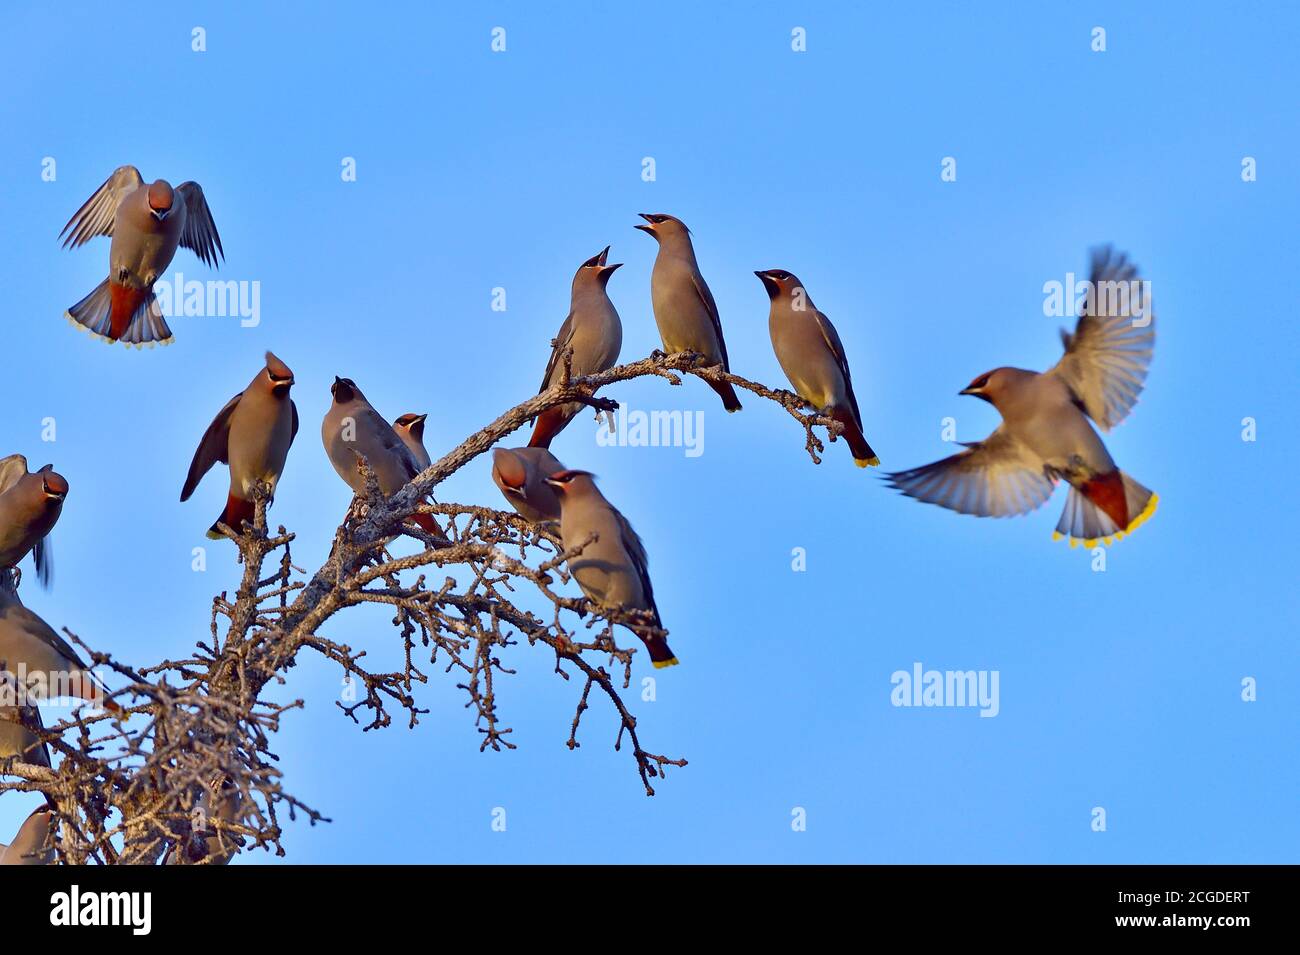 A flock of Bohemian waxwing birds landing on a dead tree against a blue sky background Stock Photo